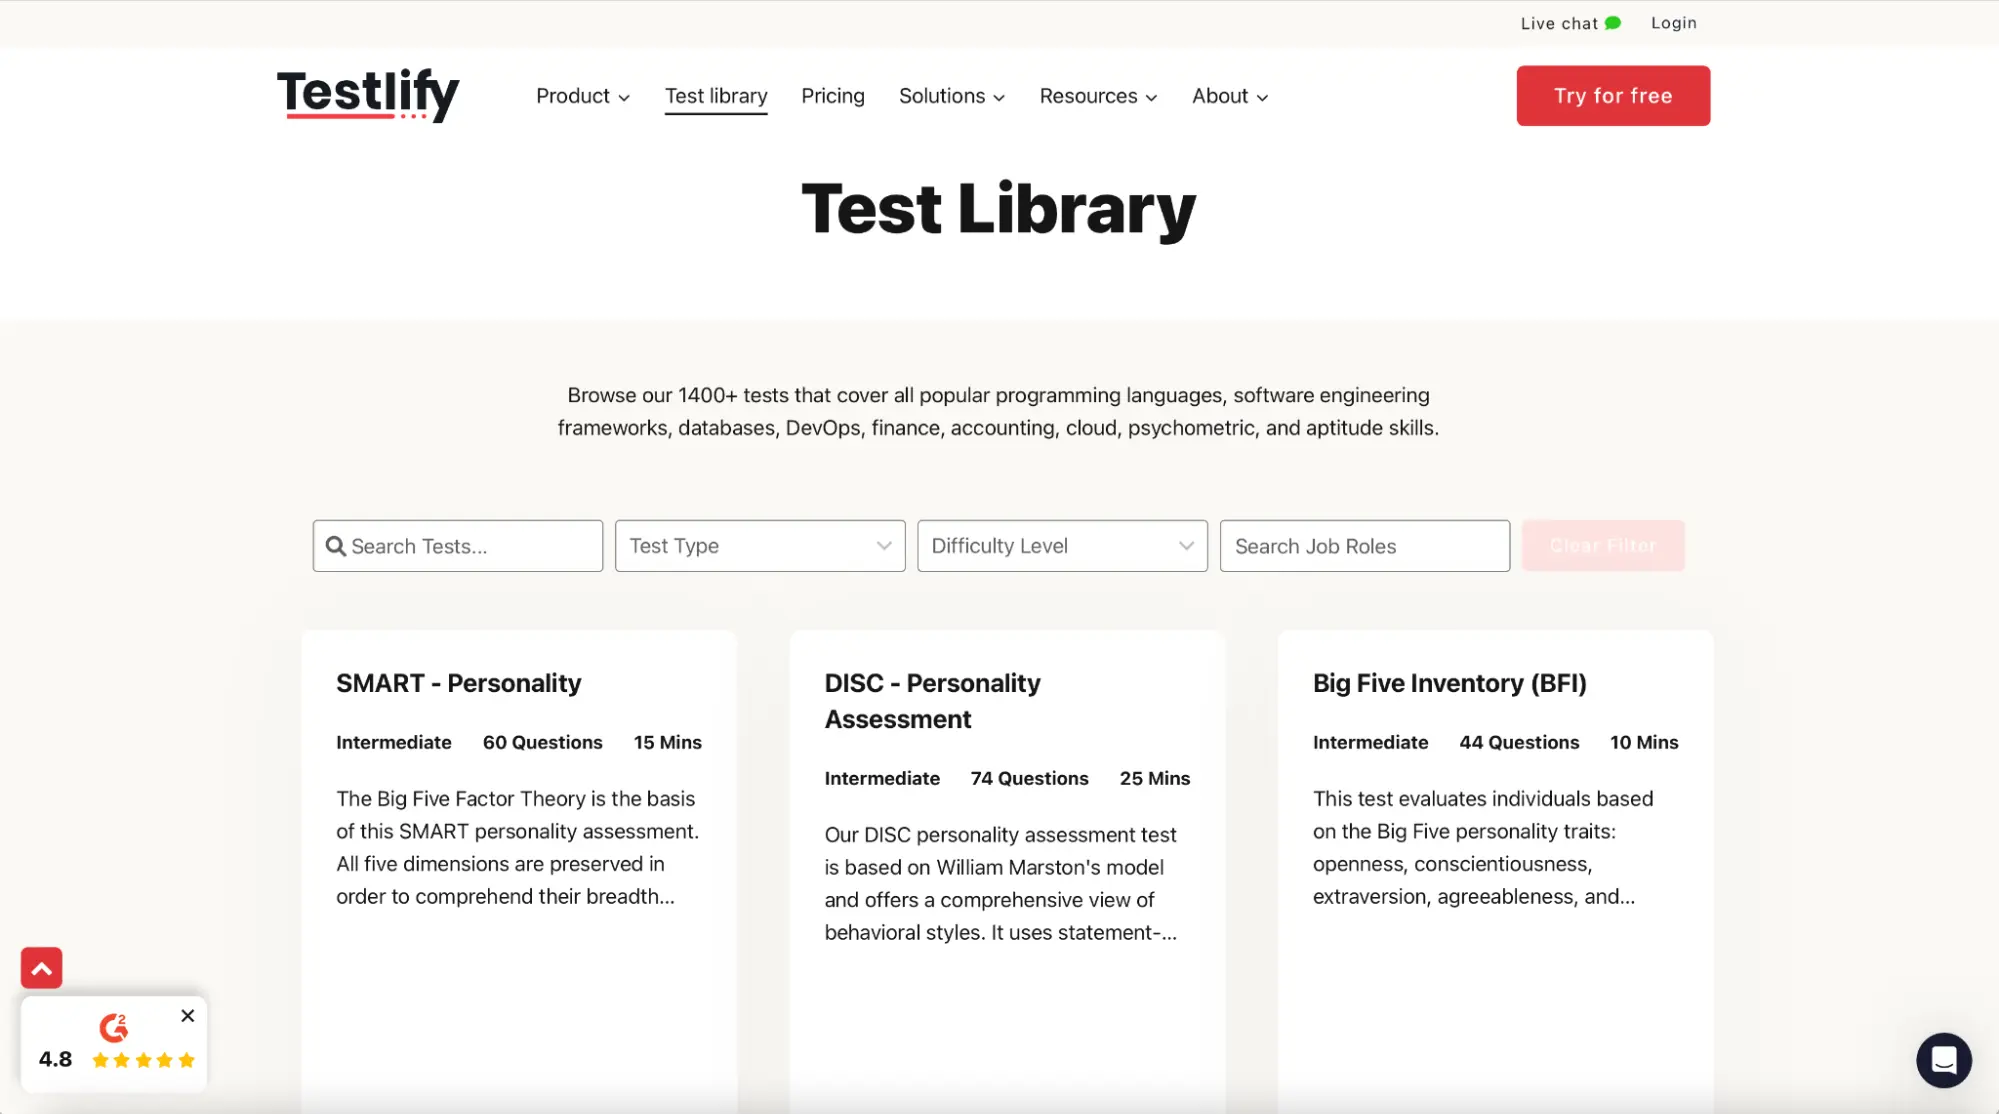 An example of Testlify's Test Library